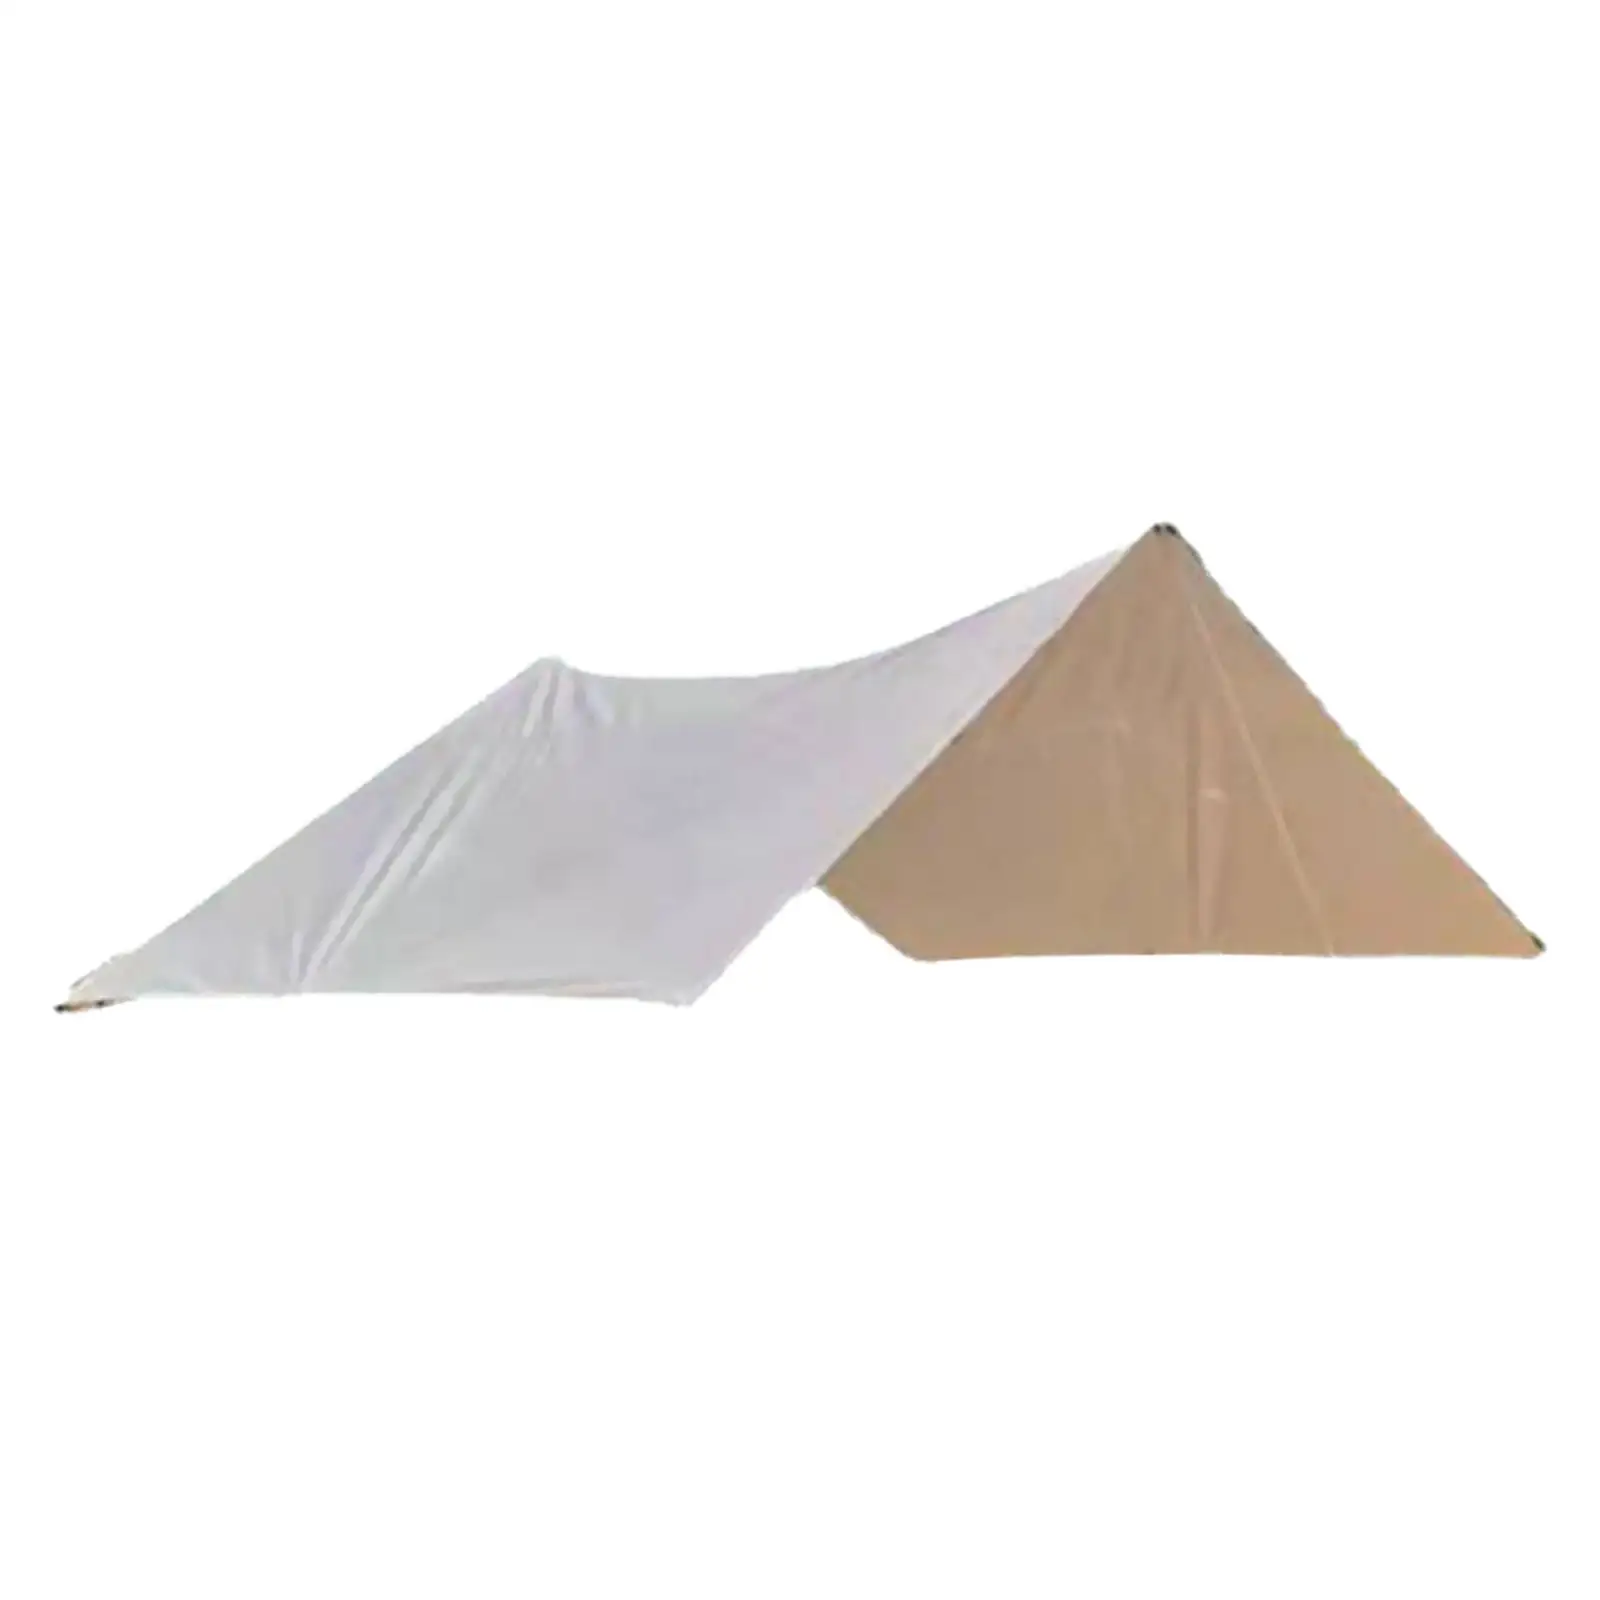 Portable Camping Tent Tarp Sun Shelter Rainproof Awning Sun Protection for Outdoor Backpacking Hiking Picnic Traveling